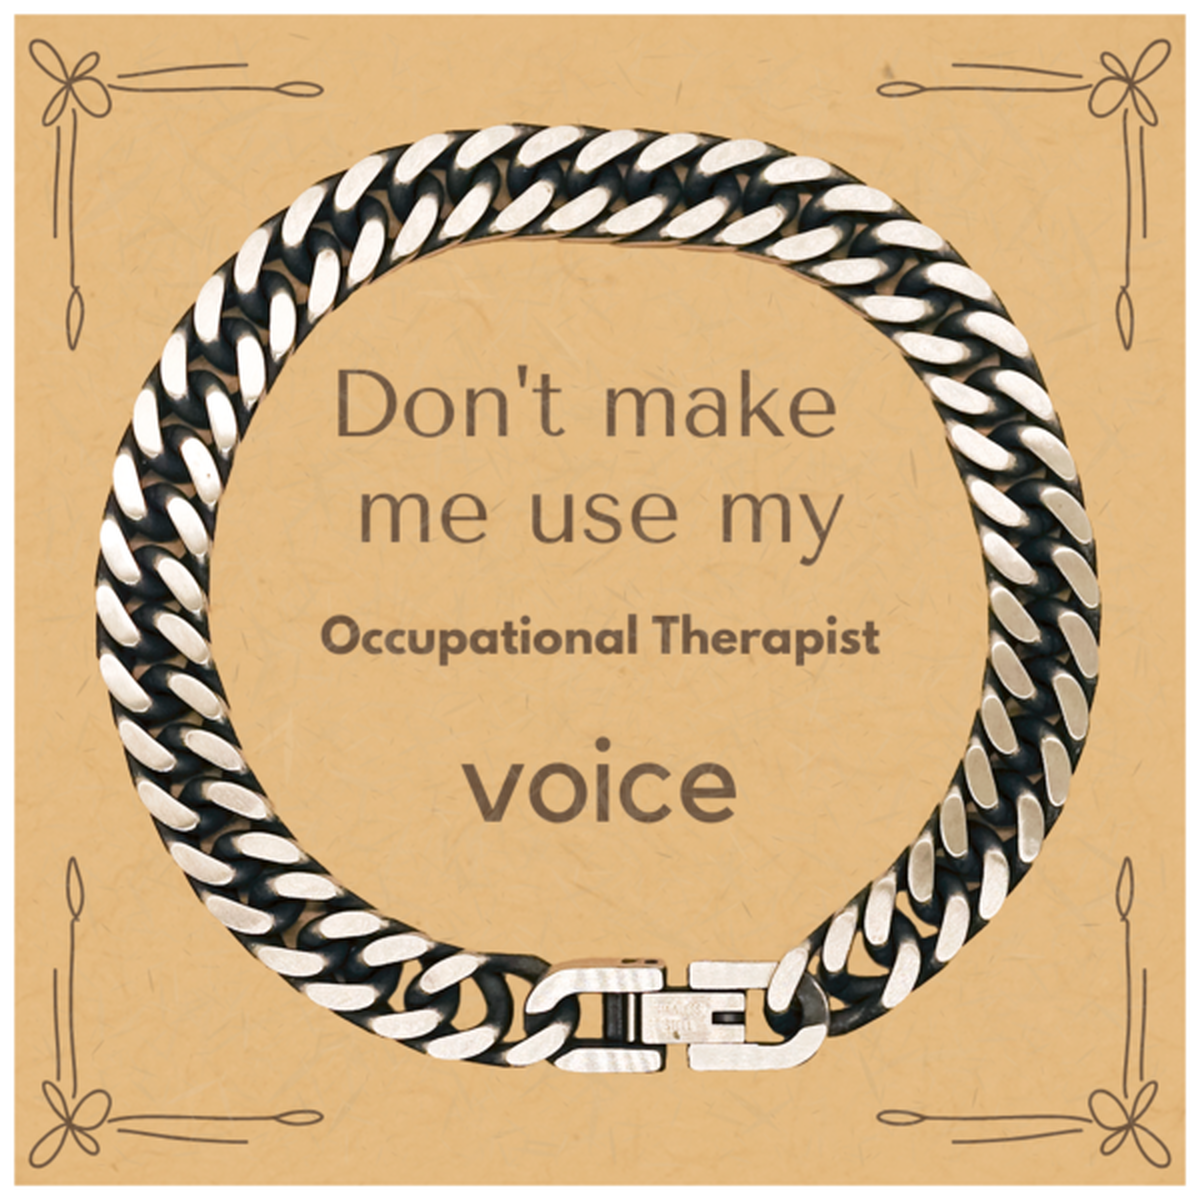 Don't make me use my Occupational Therapist voice, Sarcasm Occupational Therapist Card Gifts, Christmas Occupational Therapist Cuban Link Chain Bracelet Birthday Unique Gifts For Occupational Therapist Coworkers, Men, Women, Colleague, Friends